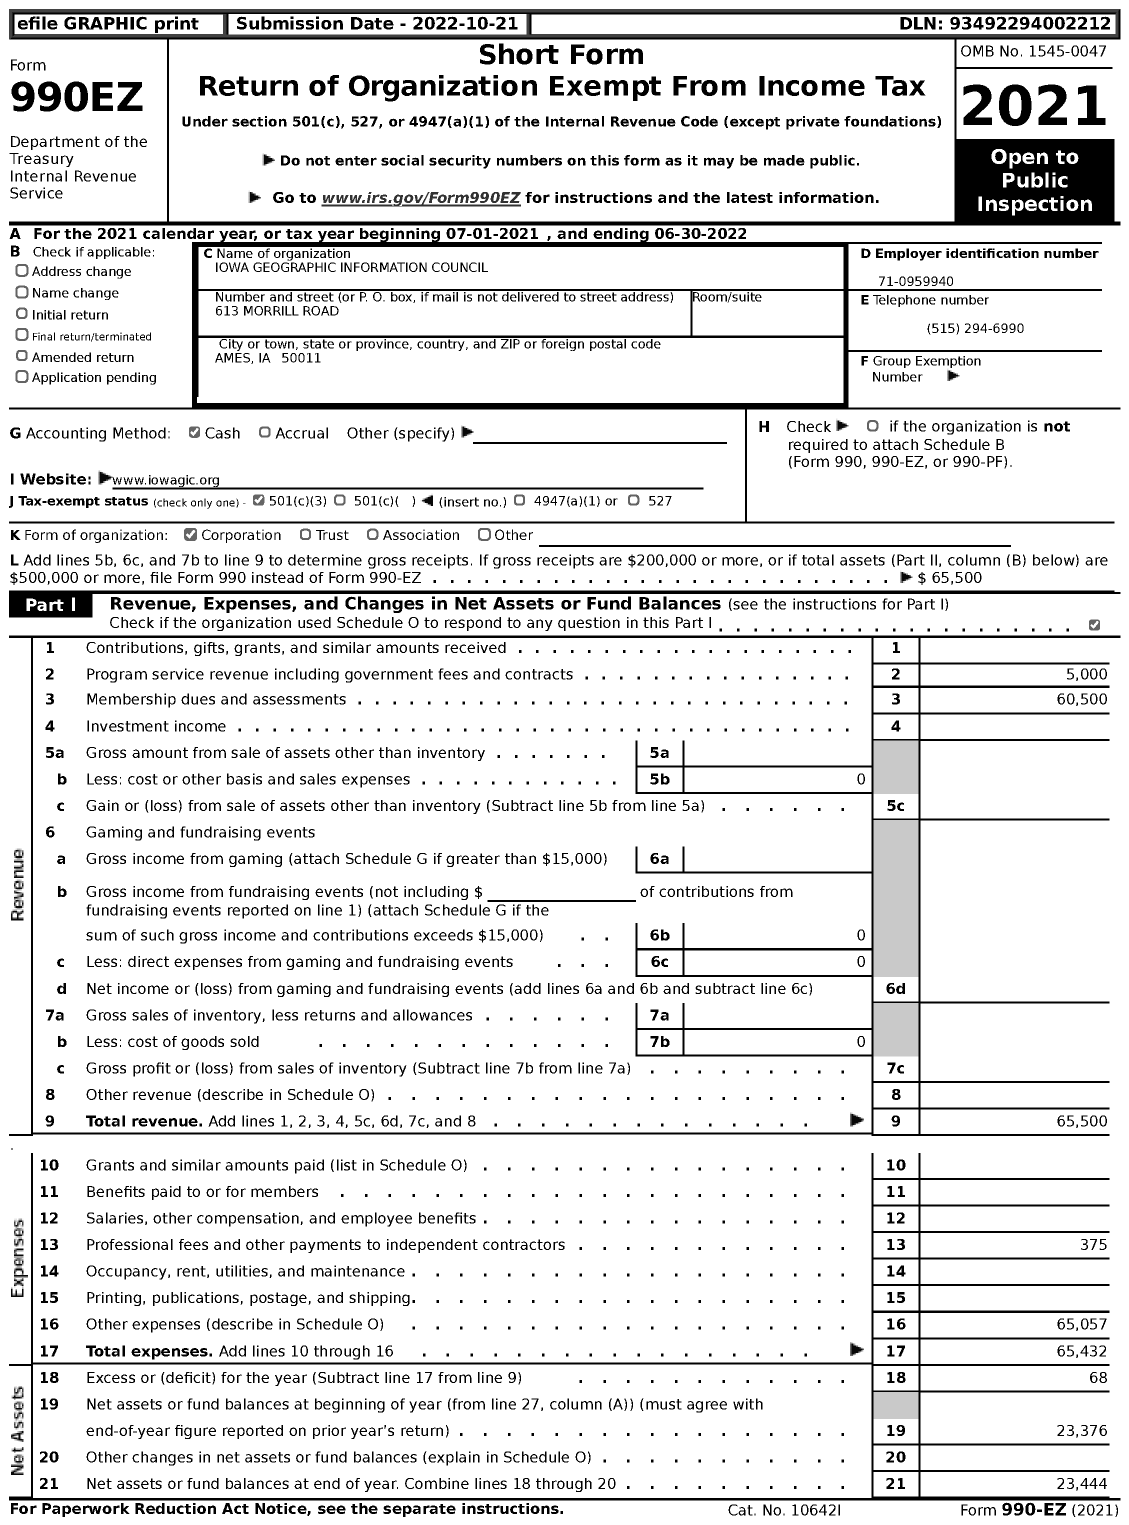 Image of first page of 2021 Form 990EZ for Iowa Geographic Information Council